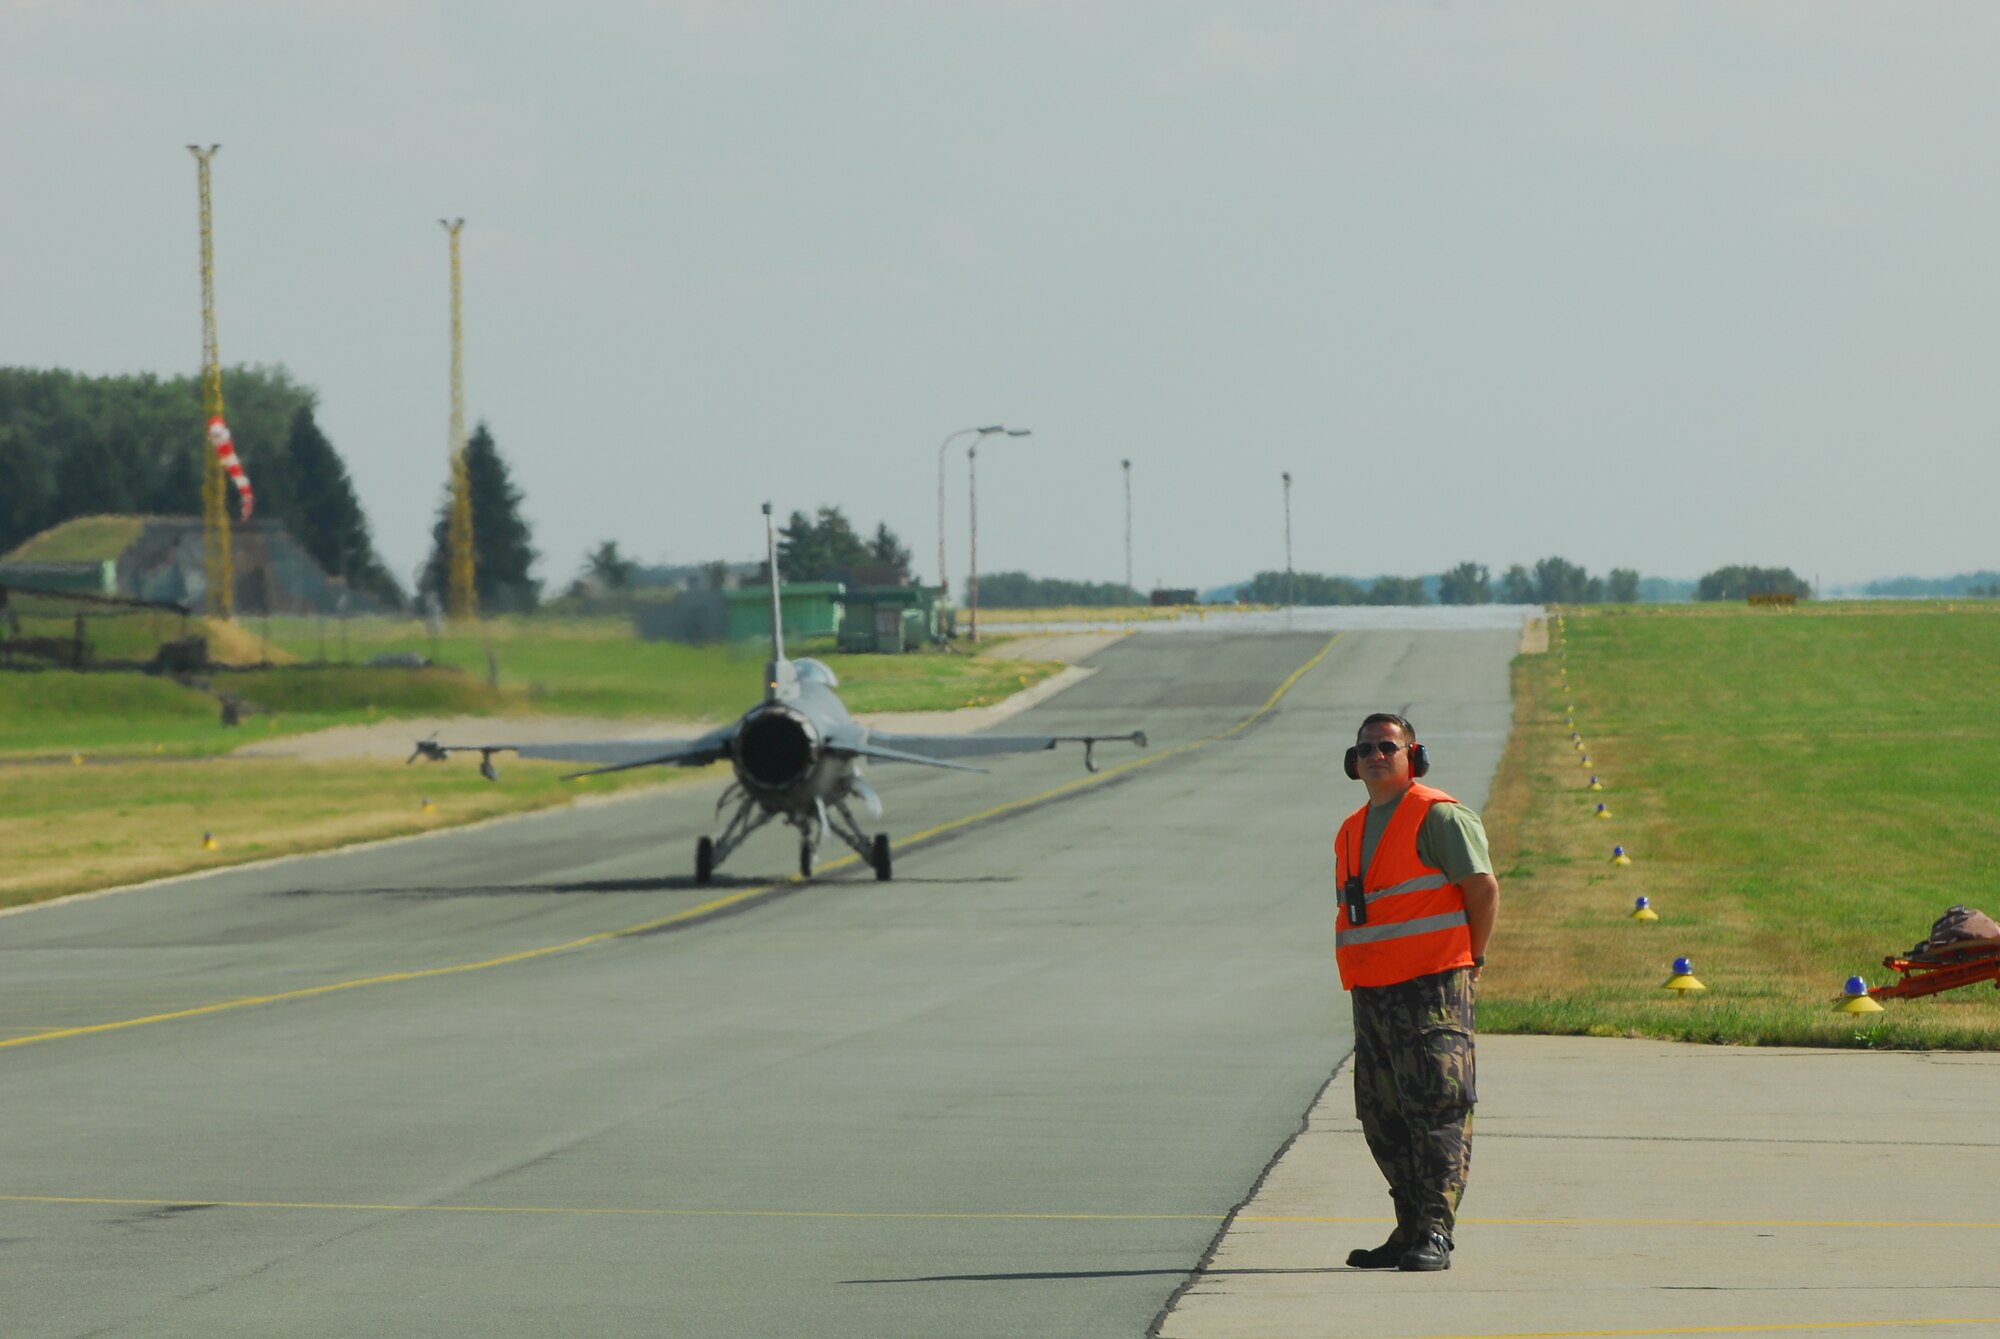 A Czech ground controller stands by as an F-16 taxis past at Caslav Air Base.  Members of the Texas Air National Guard’s 149th Fighter Wing were in the Czech Republic conducting mutual training as part of the National Guard’s state partnership program.  (U.S. Air Force photo by Capt Randy Saldivar)